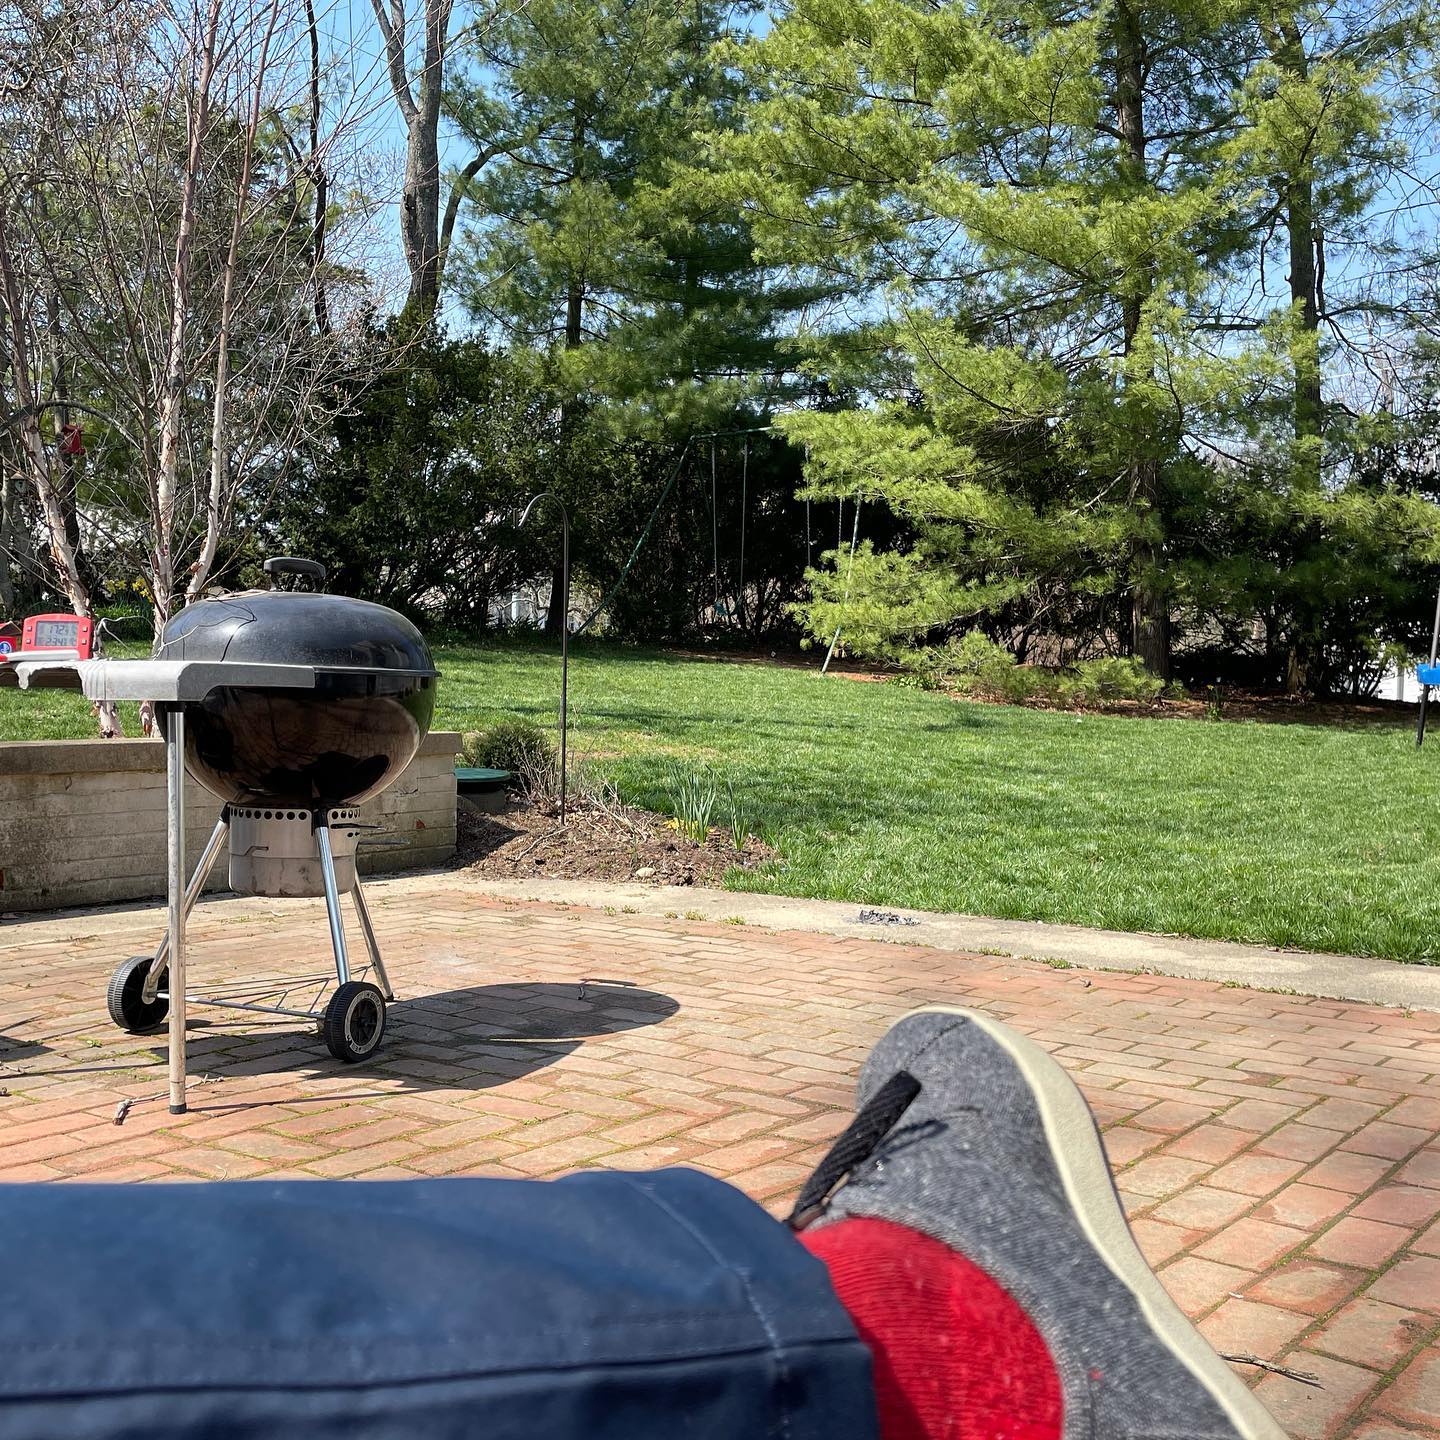 Smoking Easter ribs: can’t believe I have this life. I don’t deserve it. Blessed & humbled. Don’t waste a moment. Leave the world better than you found it.